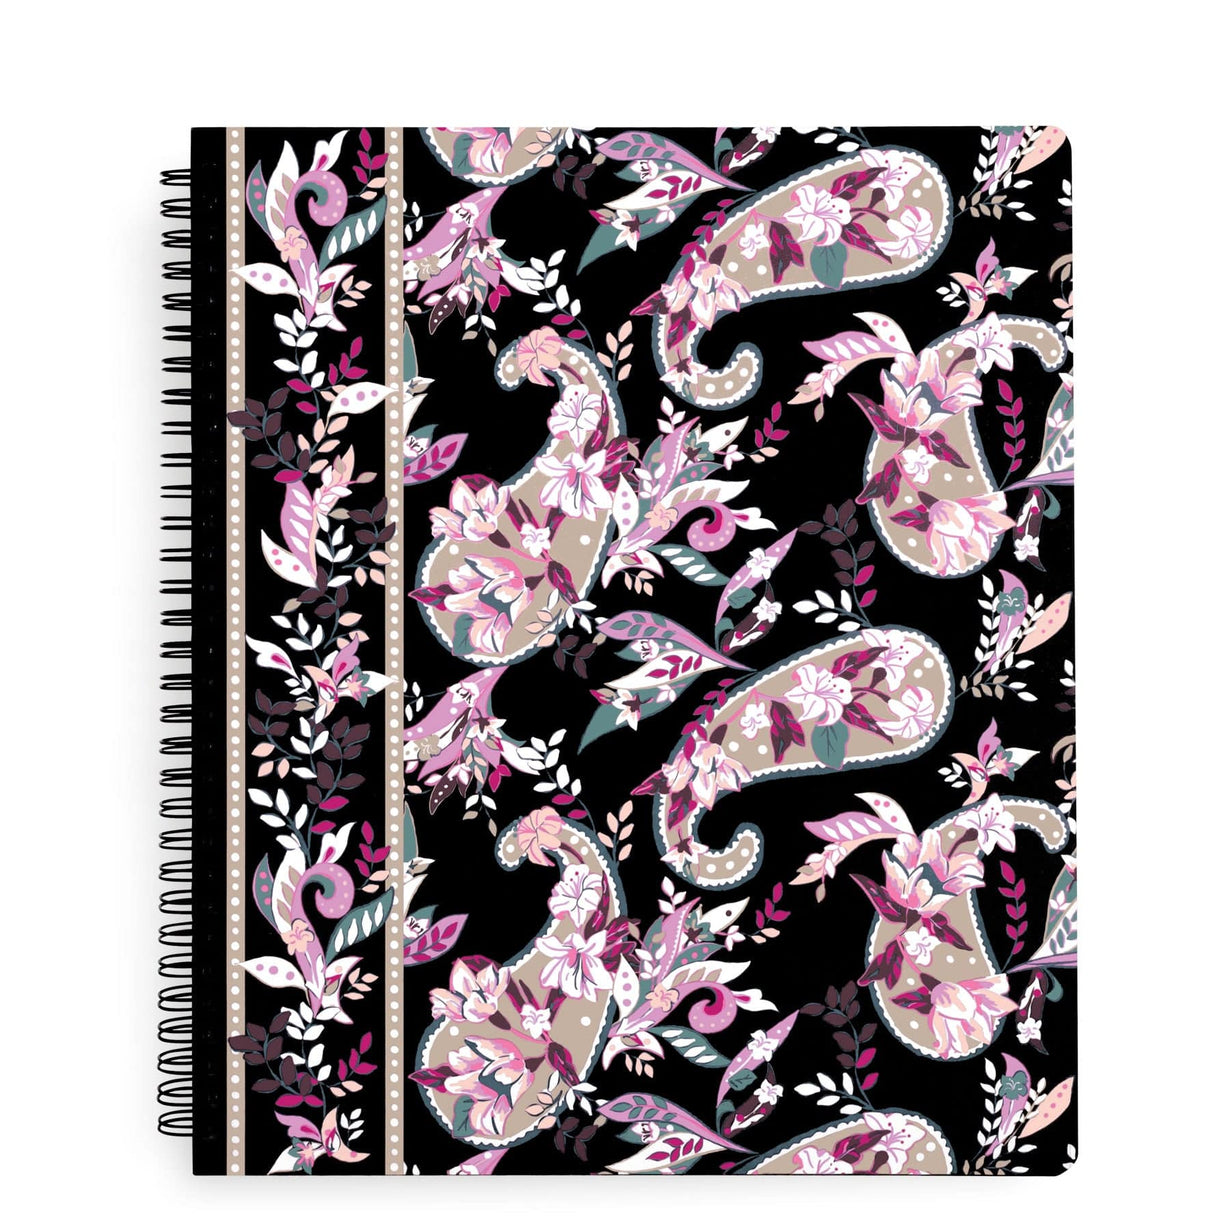 Black notebook with pink floral paisley pattern